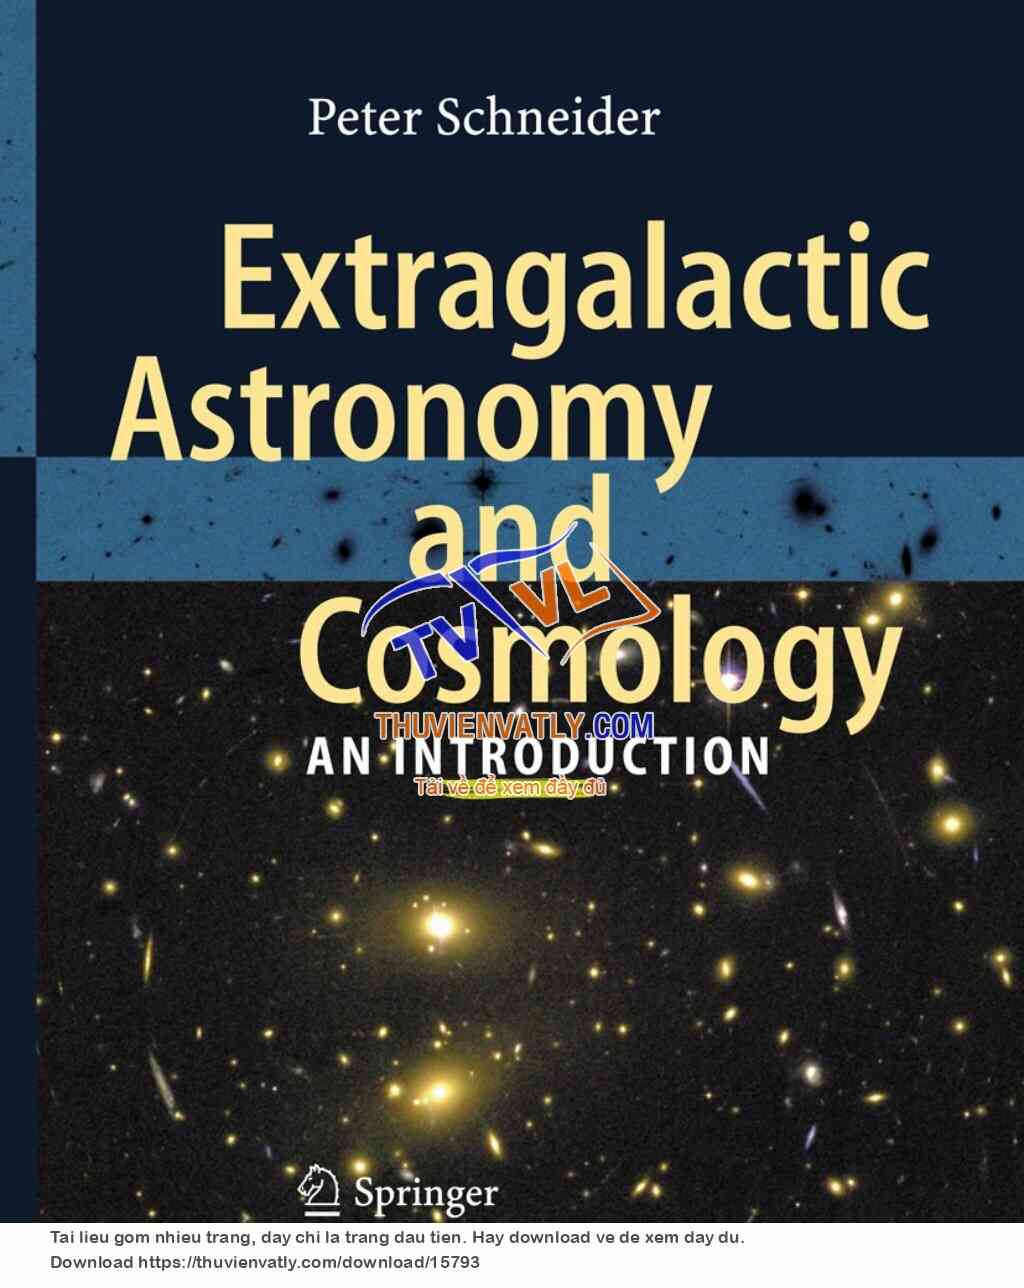 Extragalactic Astronomy and Cosmology - An Introduction (Peter Schneider, Springer 2006)